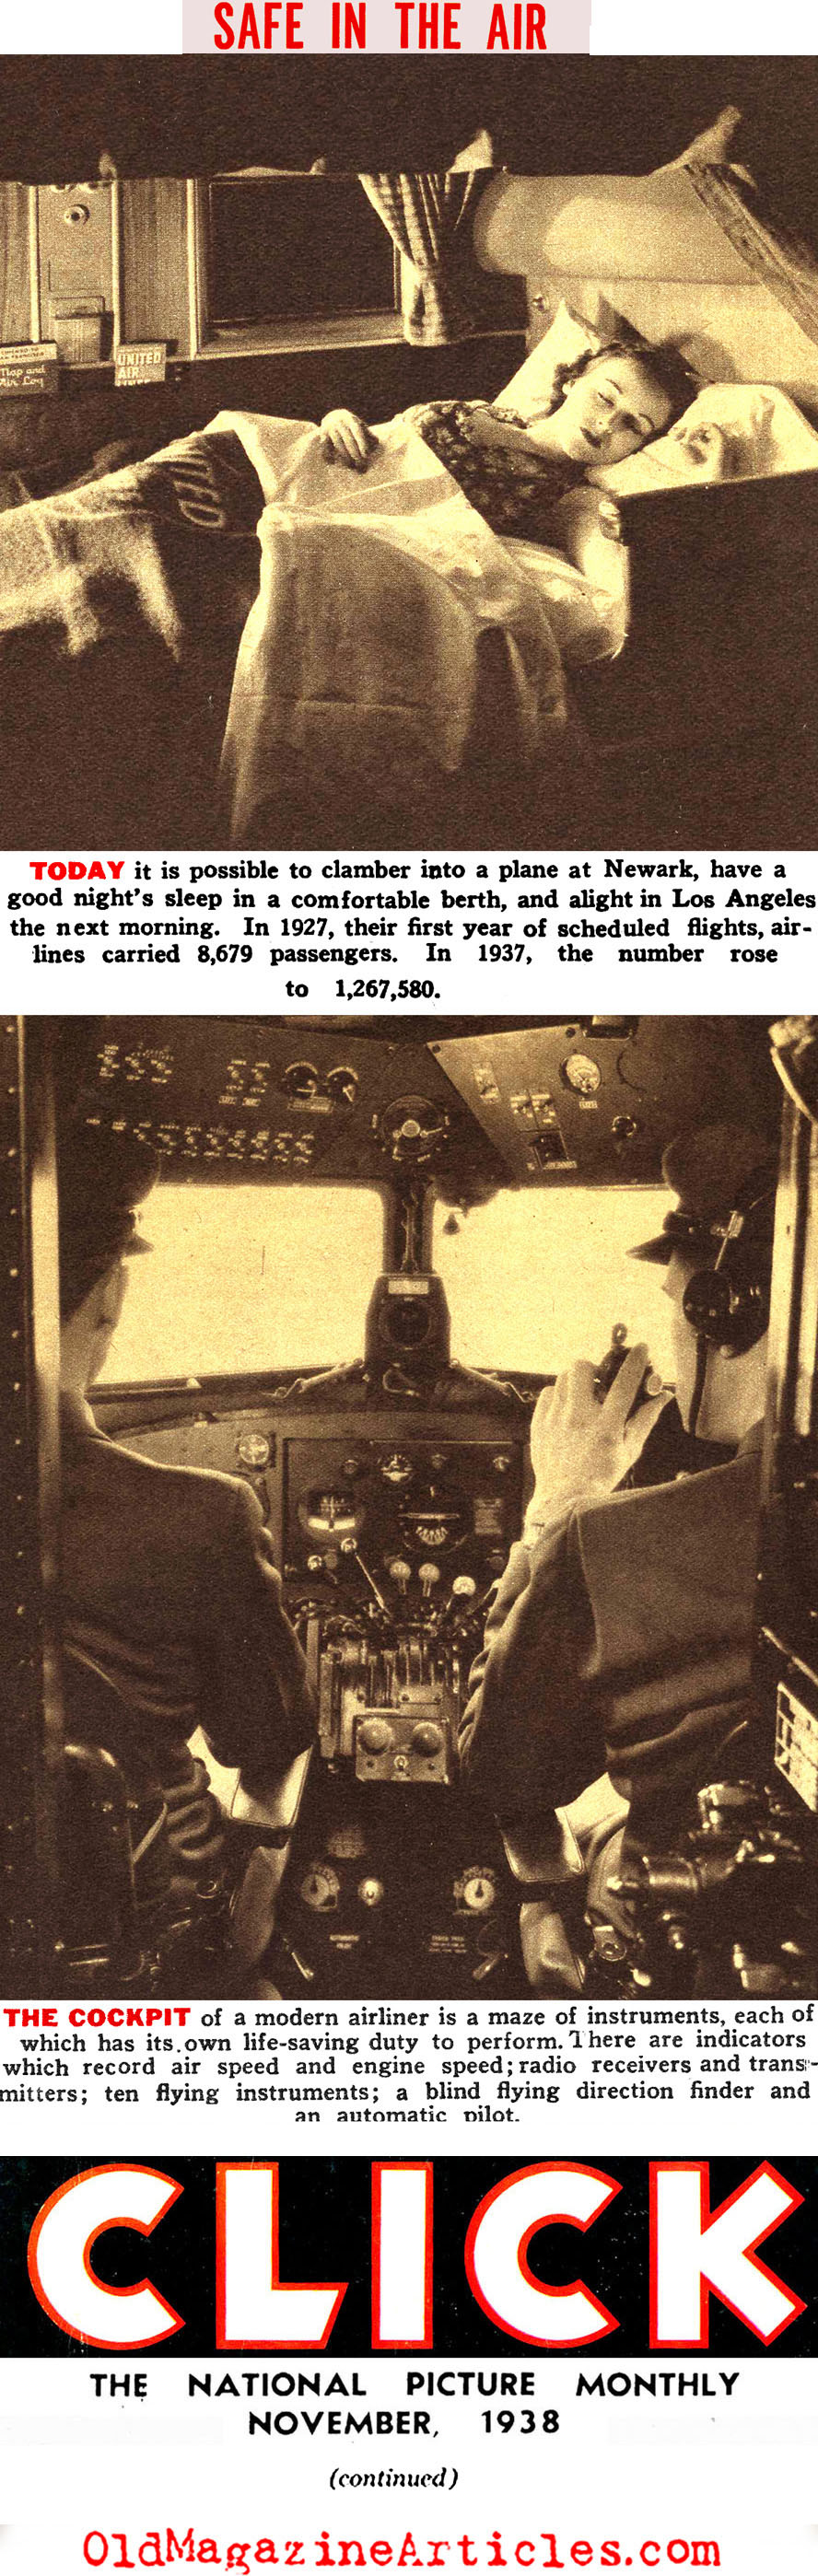 The First Ten Years of Passenger Air Travel (Click Magazine, 1938)